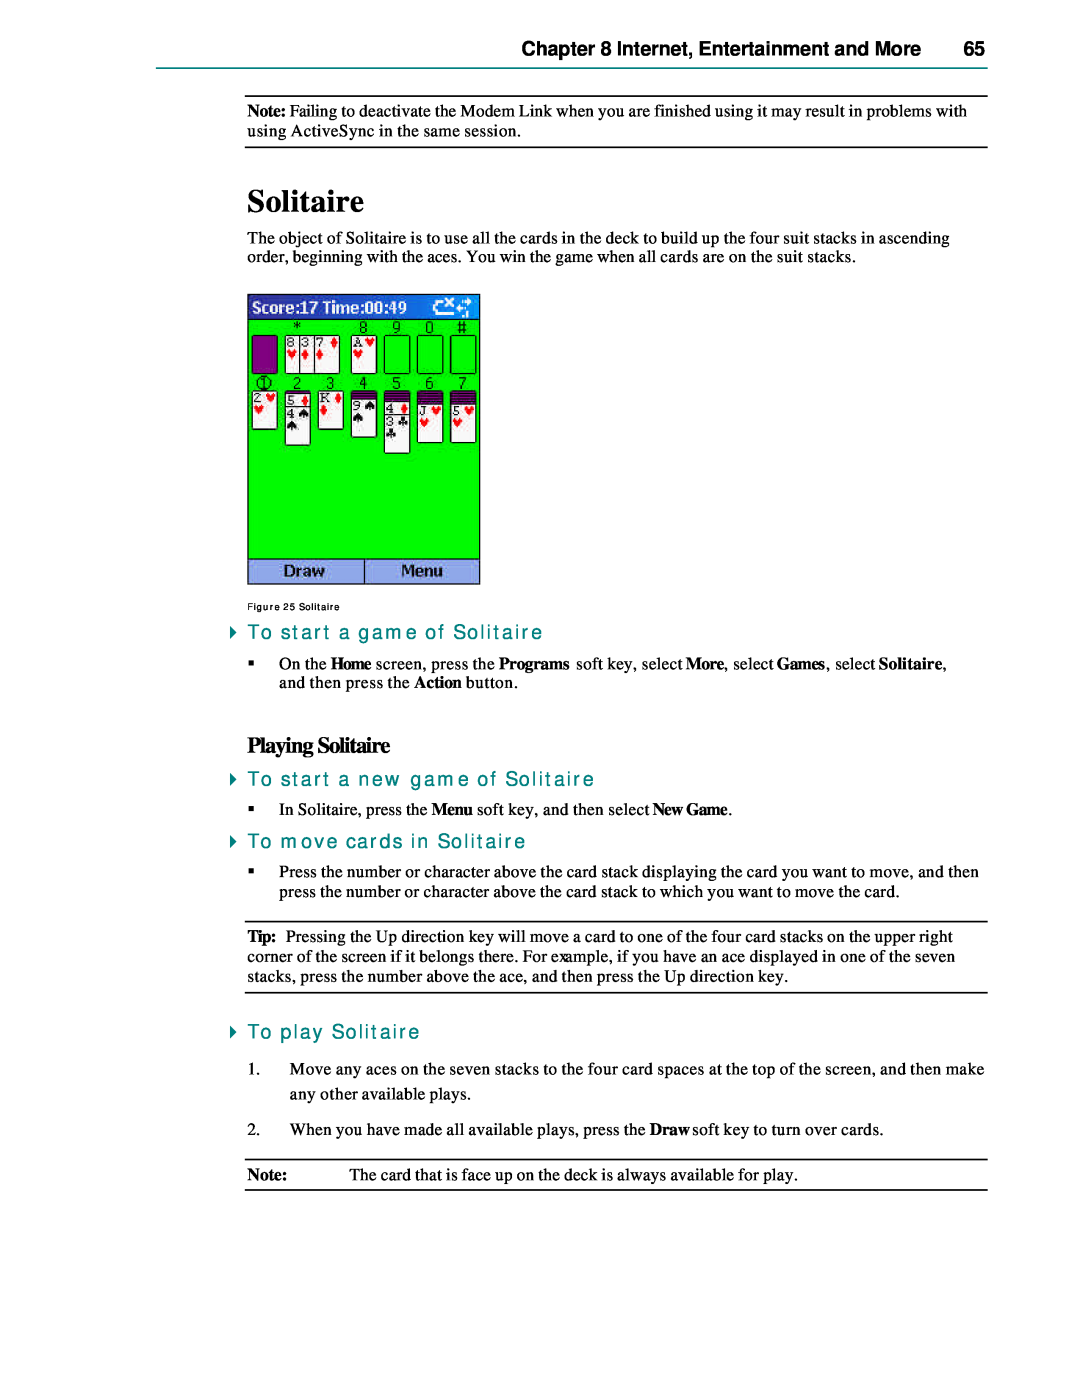 Microsoft Smartphone 2002 manual Playing Solitaire, Internet, Entertainment and More, To start a game of Solitaire 